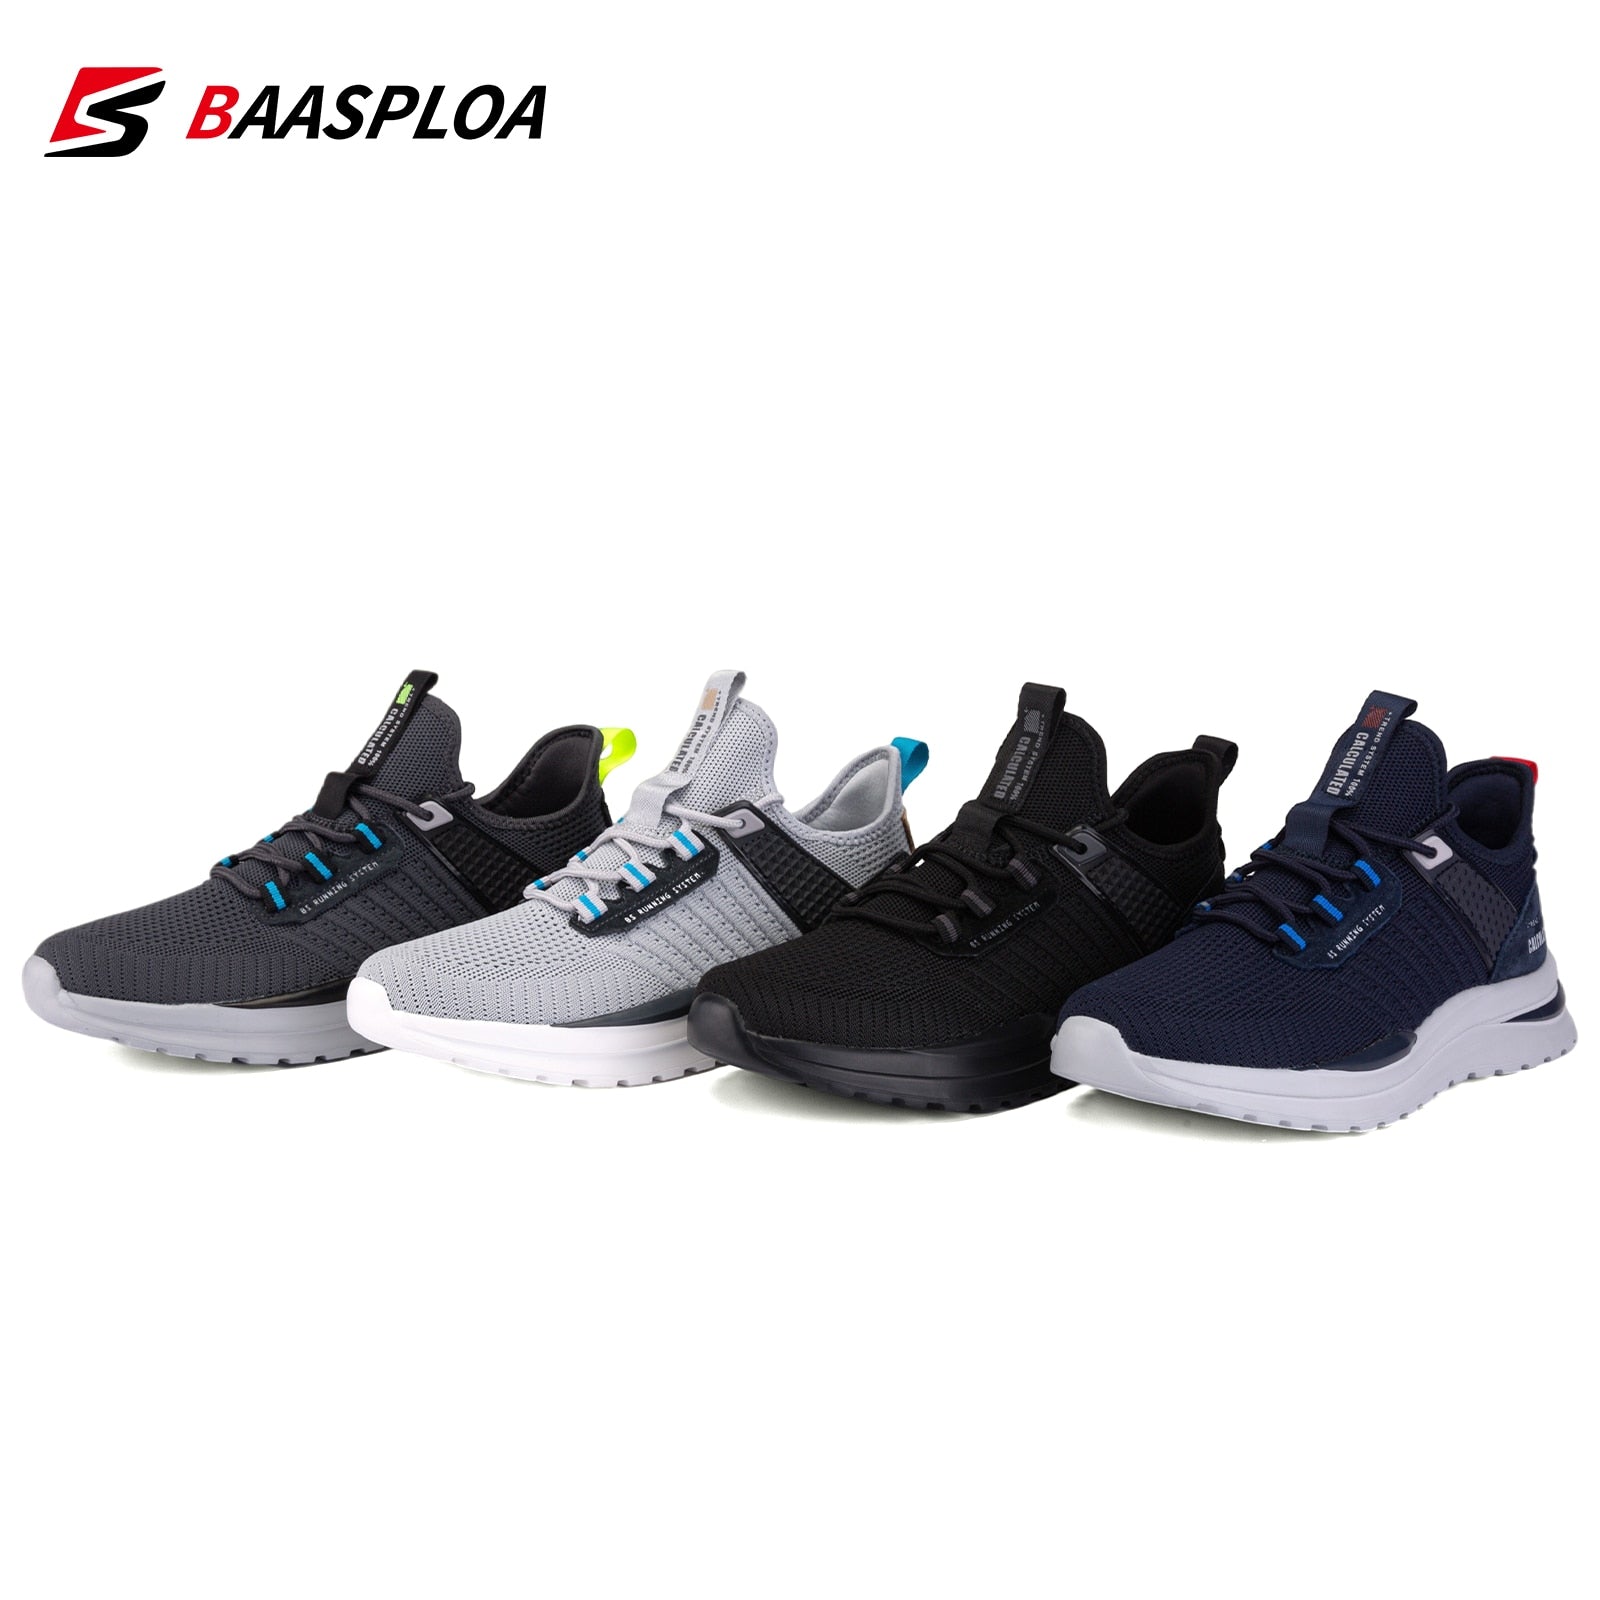 Men's Sport Sneaker Lightweight Casual Shoes Comfortable Mesh Running Shoe Male Breathable Tenis Walking Shoes The Clothing Company Sydney